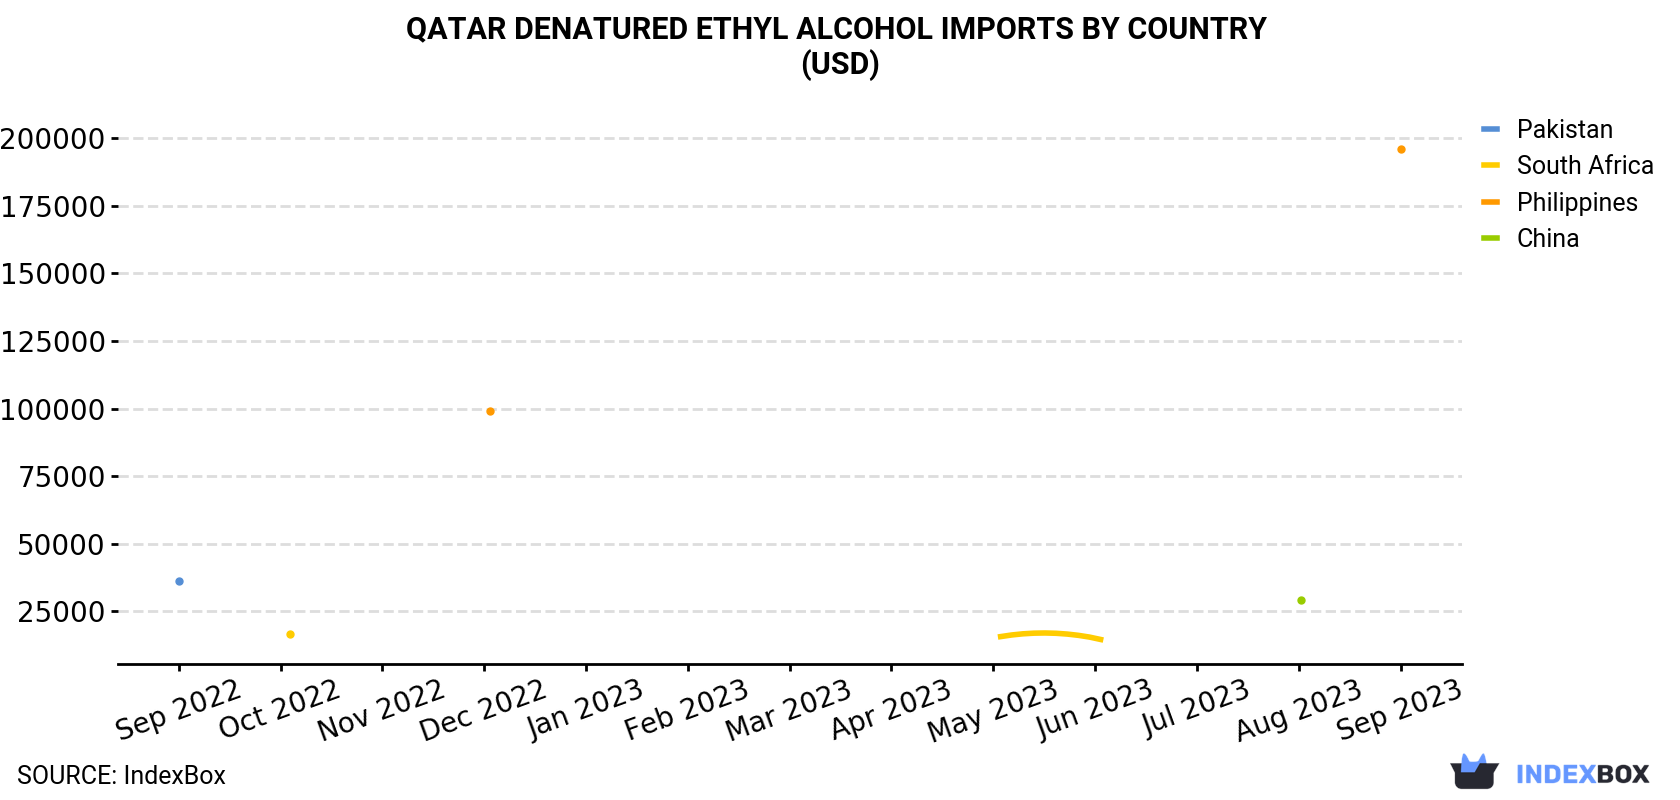 Qatar Denatured Ethyl Alcohol Imports By Country (USD)